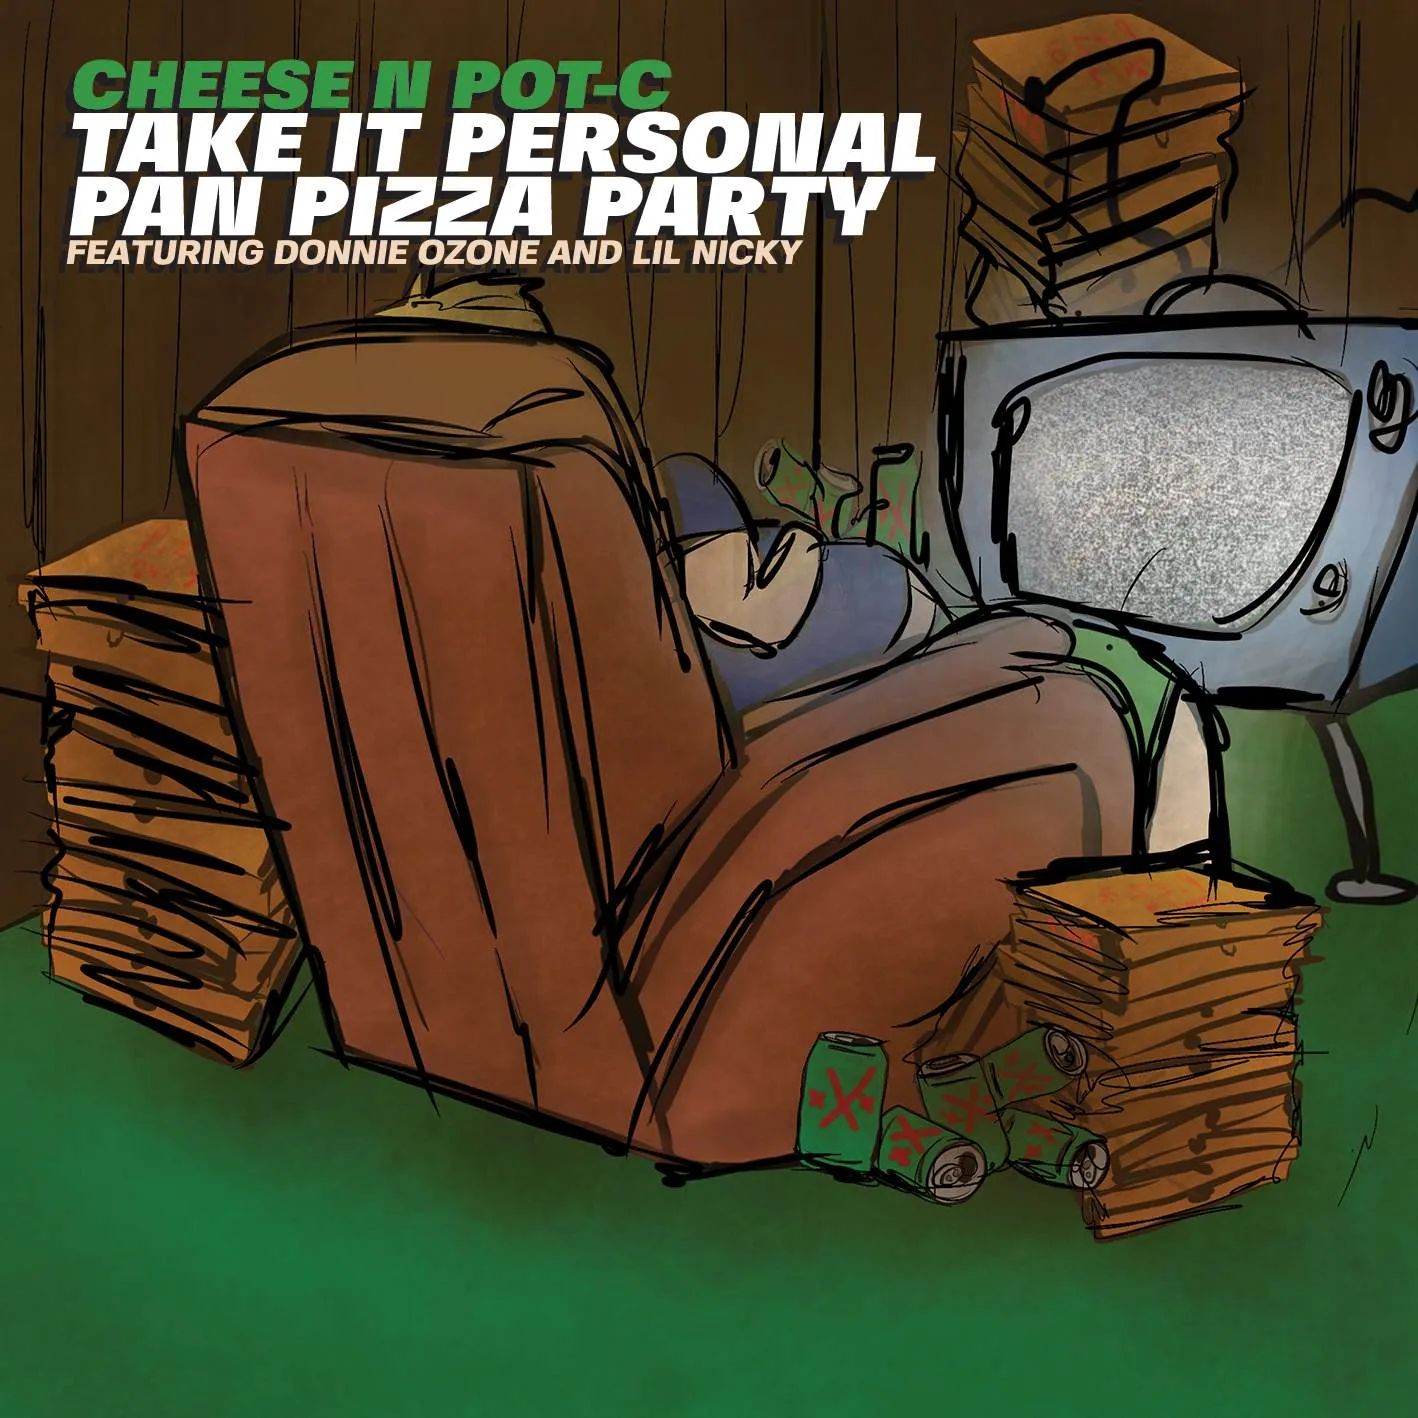 Album cover for “Take It Personal Pan Pizza Party (Featuring Donnie Ozone &amp; Lil Nicky)” by Cheese N Pot-C